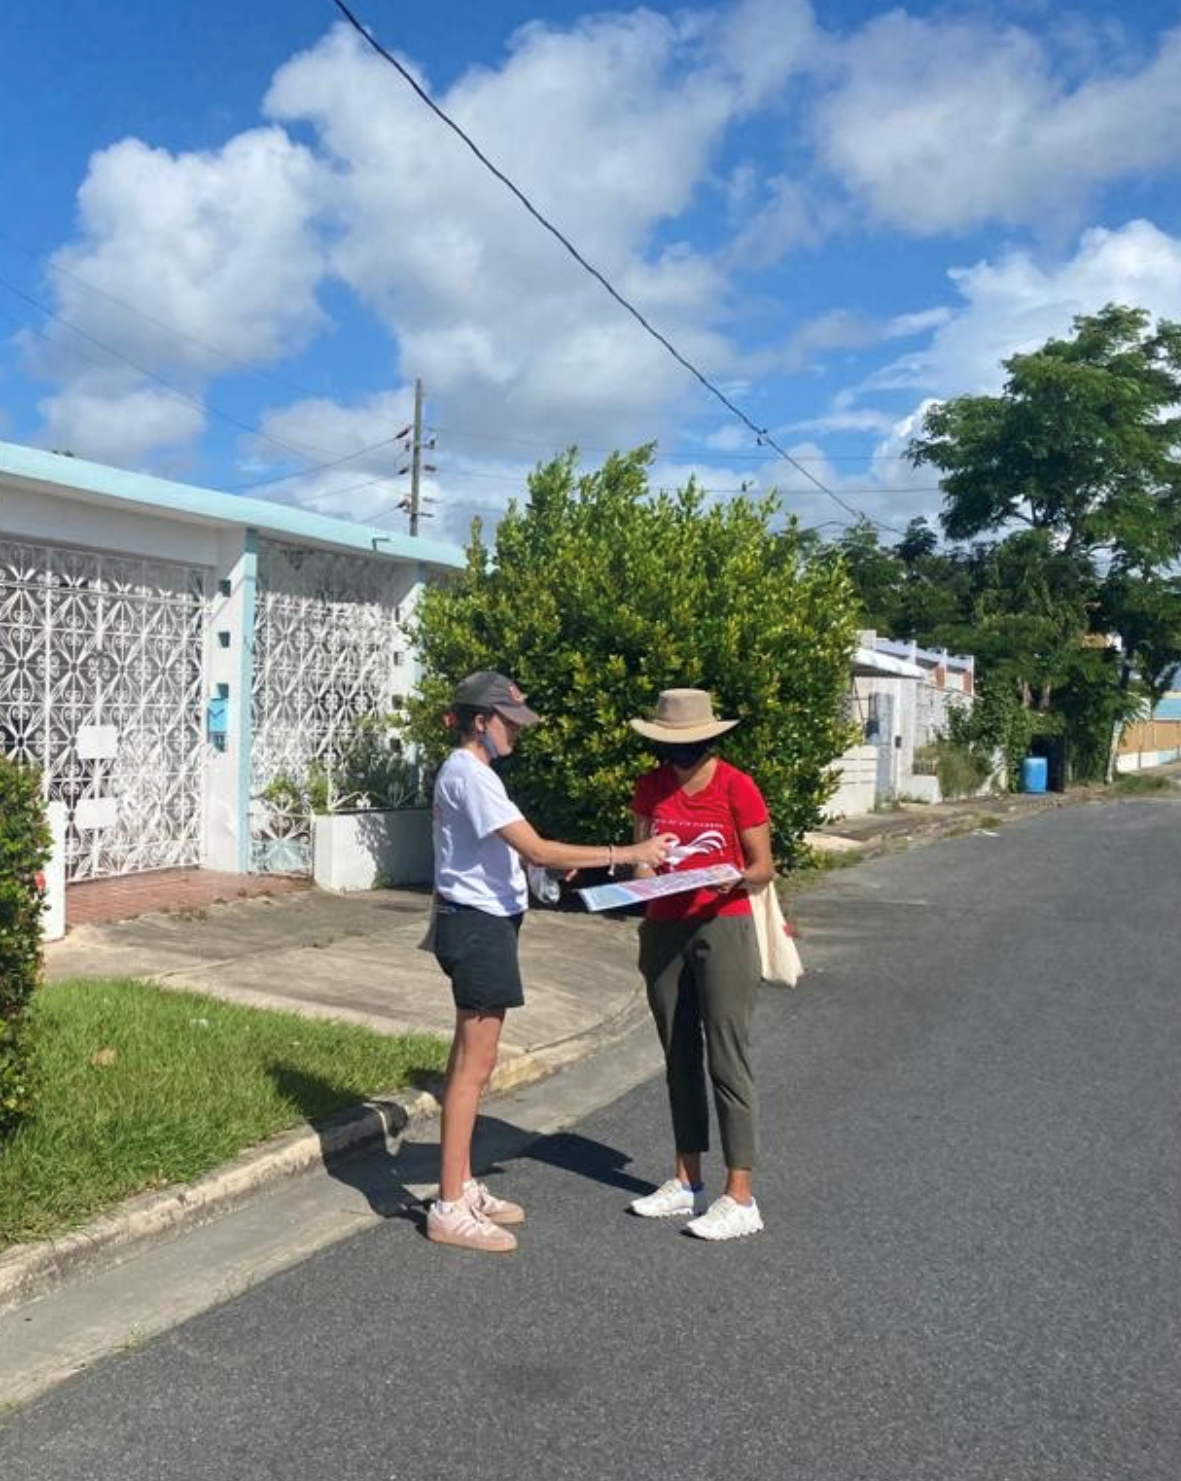 Two people standing on a suburban street in Puerto Rico.